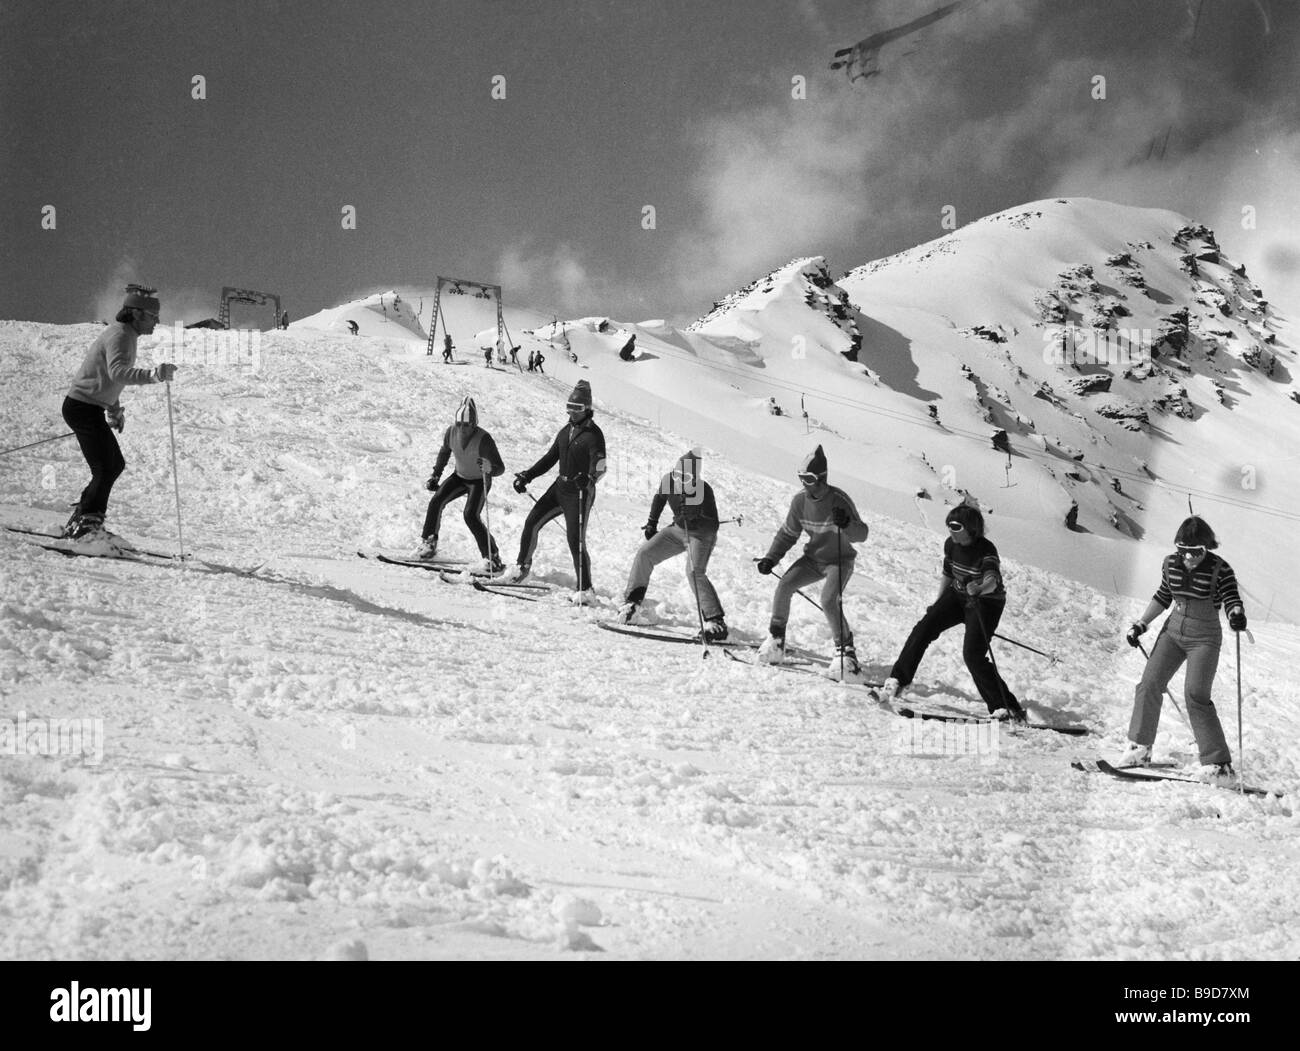 Climbing The Mountain Black and White Stock Photos & Images - Alamy